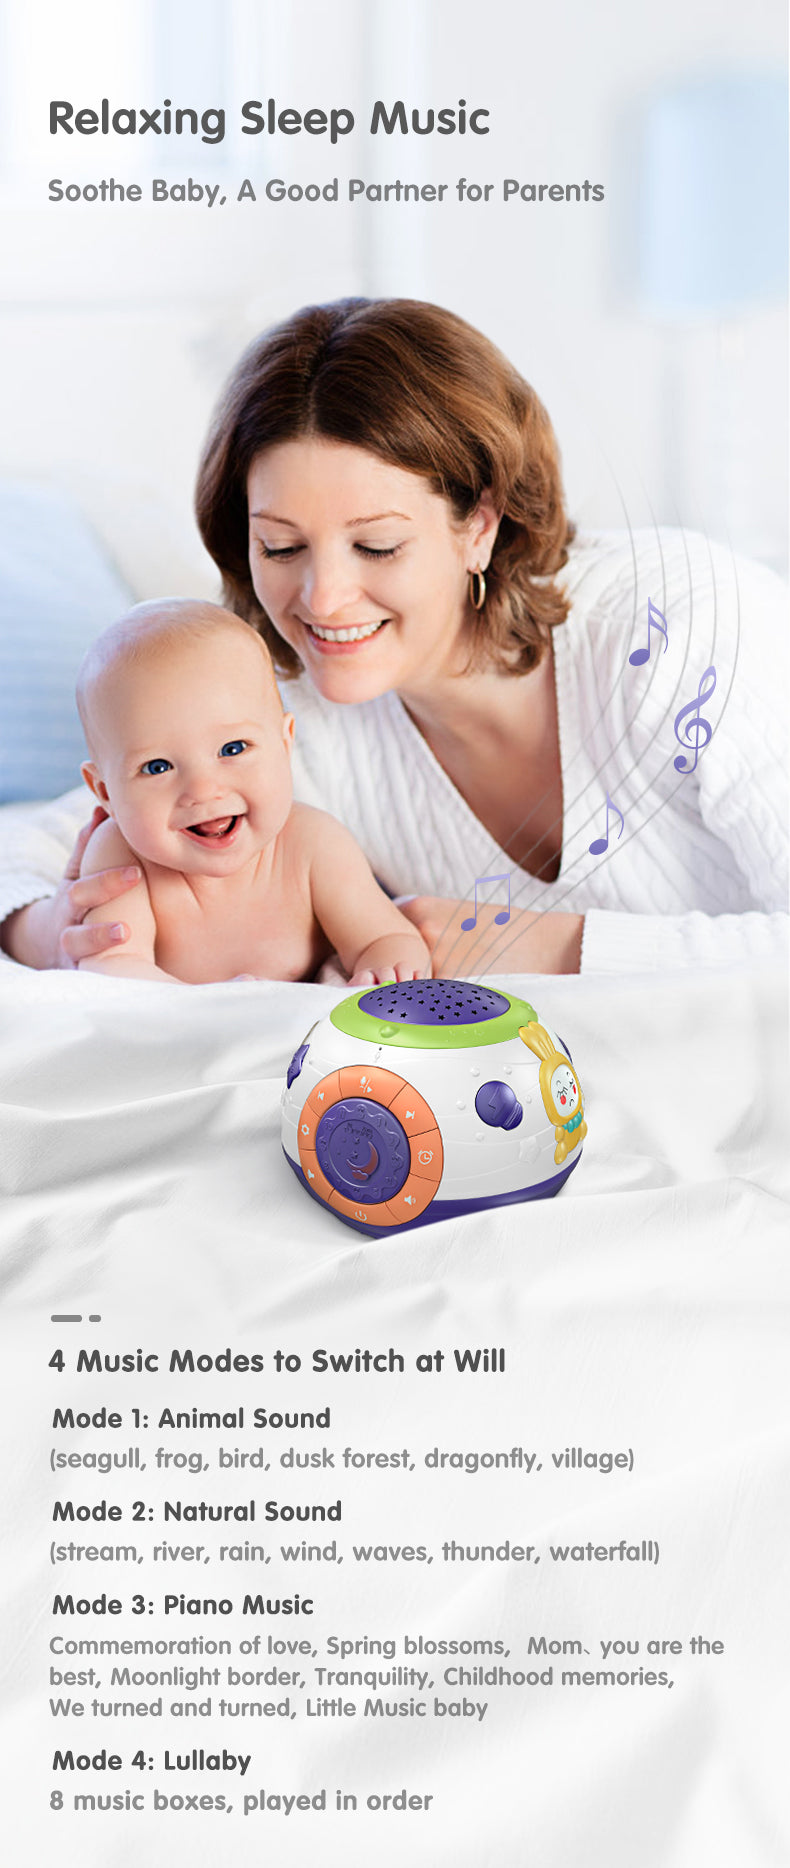 Story Ball Lamp Glowing Soothing Baby Sleeping Lamp - SHOPSOLONY